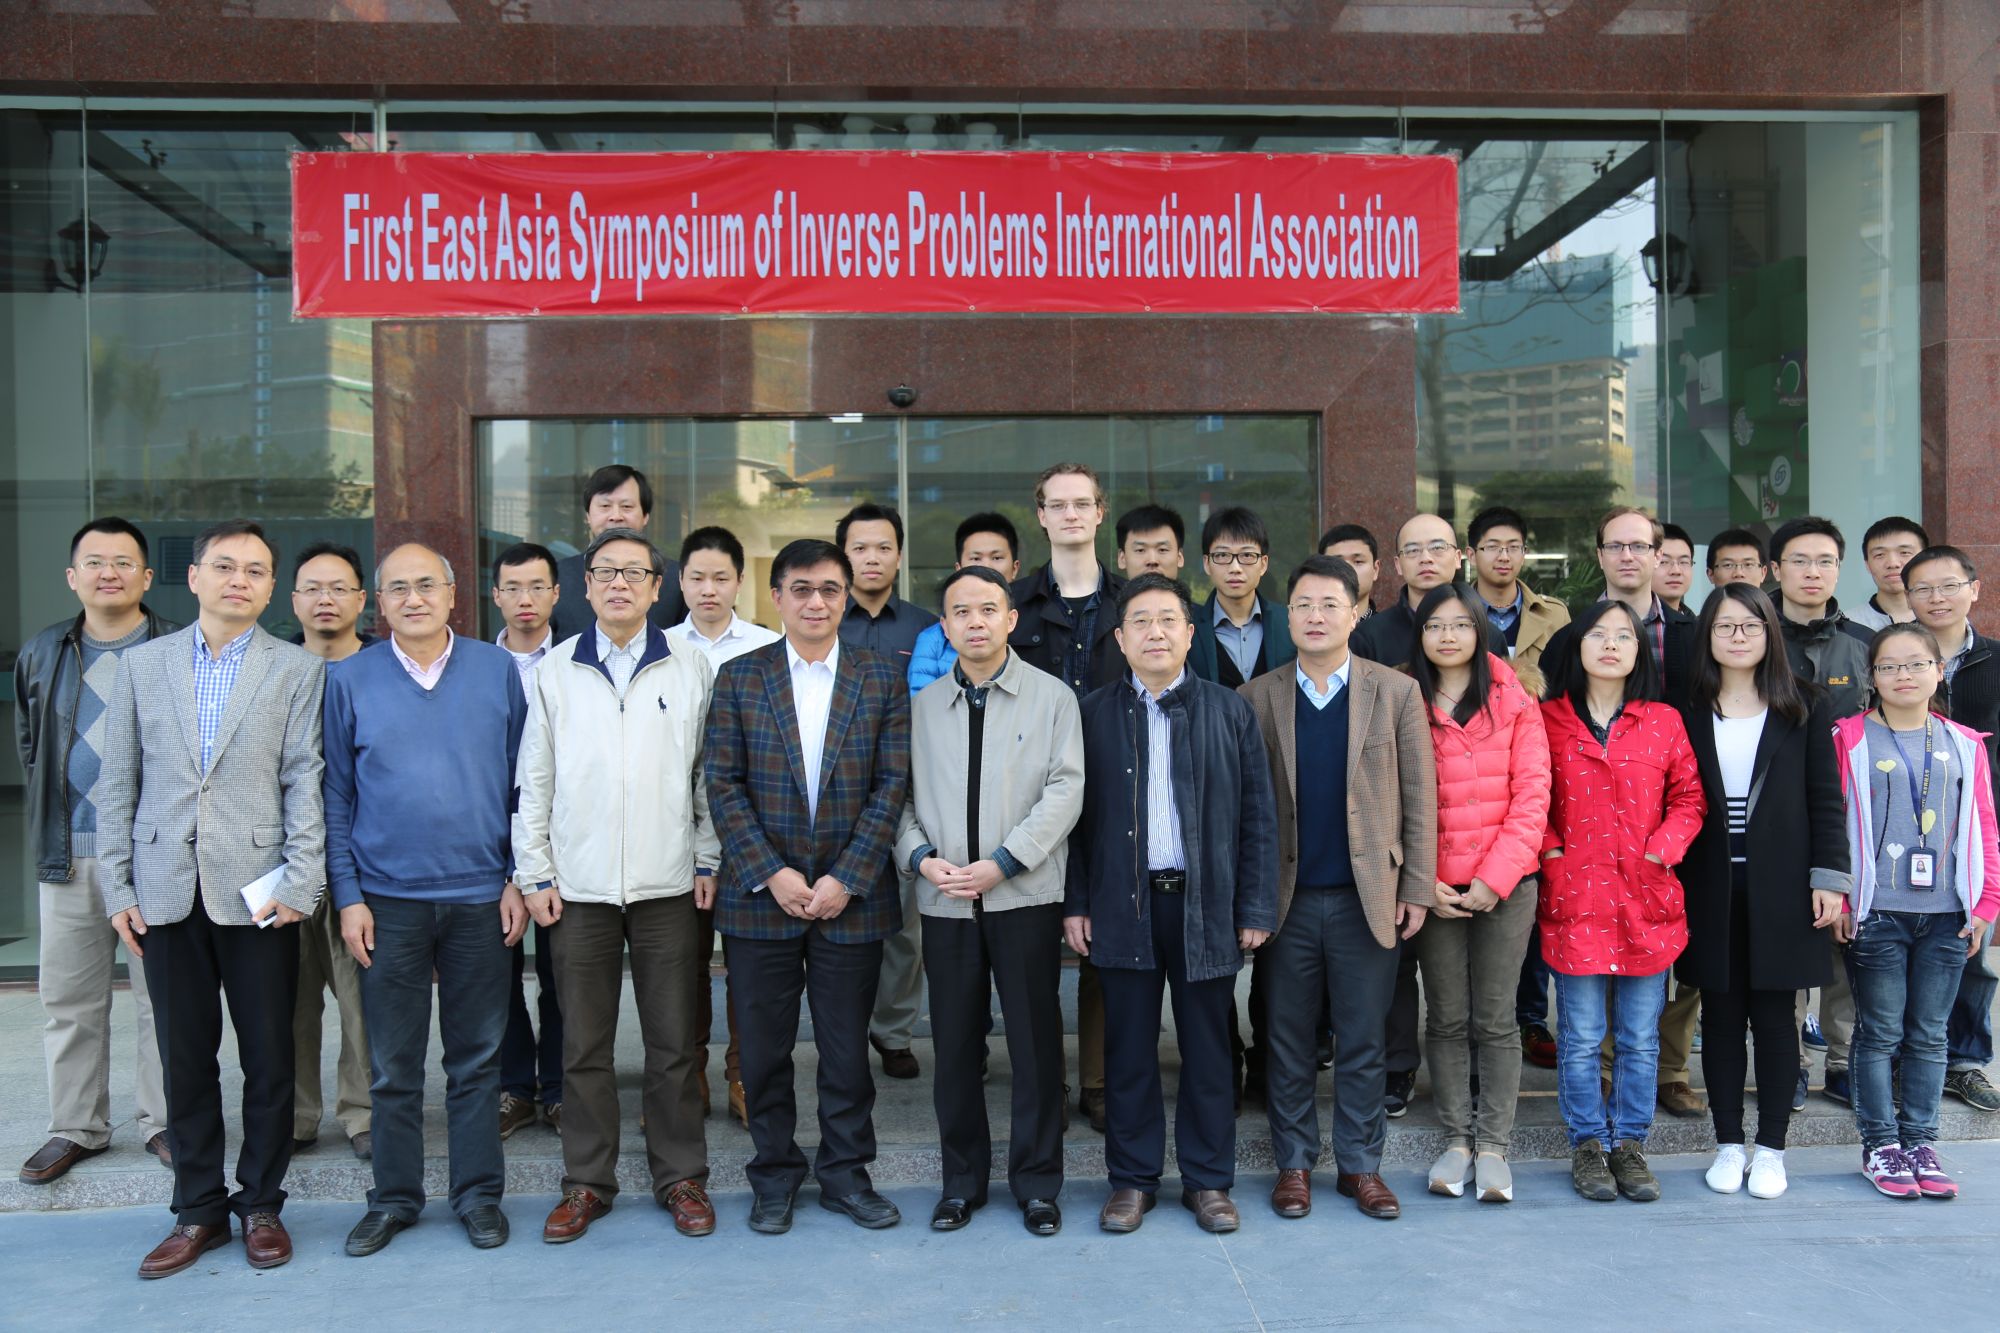 The 1st East Asia Symposium of Inverse Problems International Association opens at SUSTech